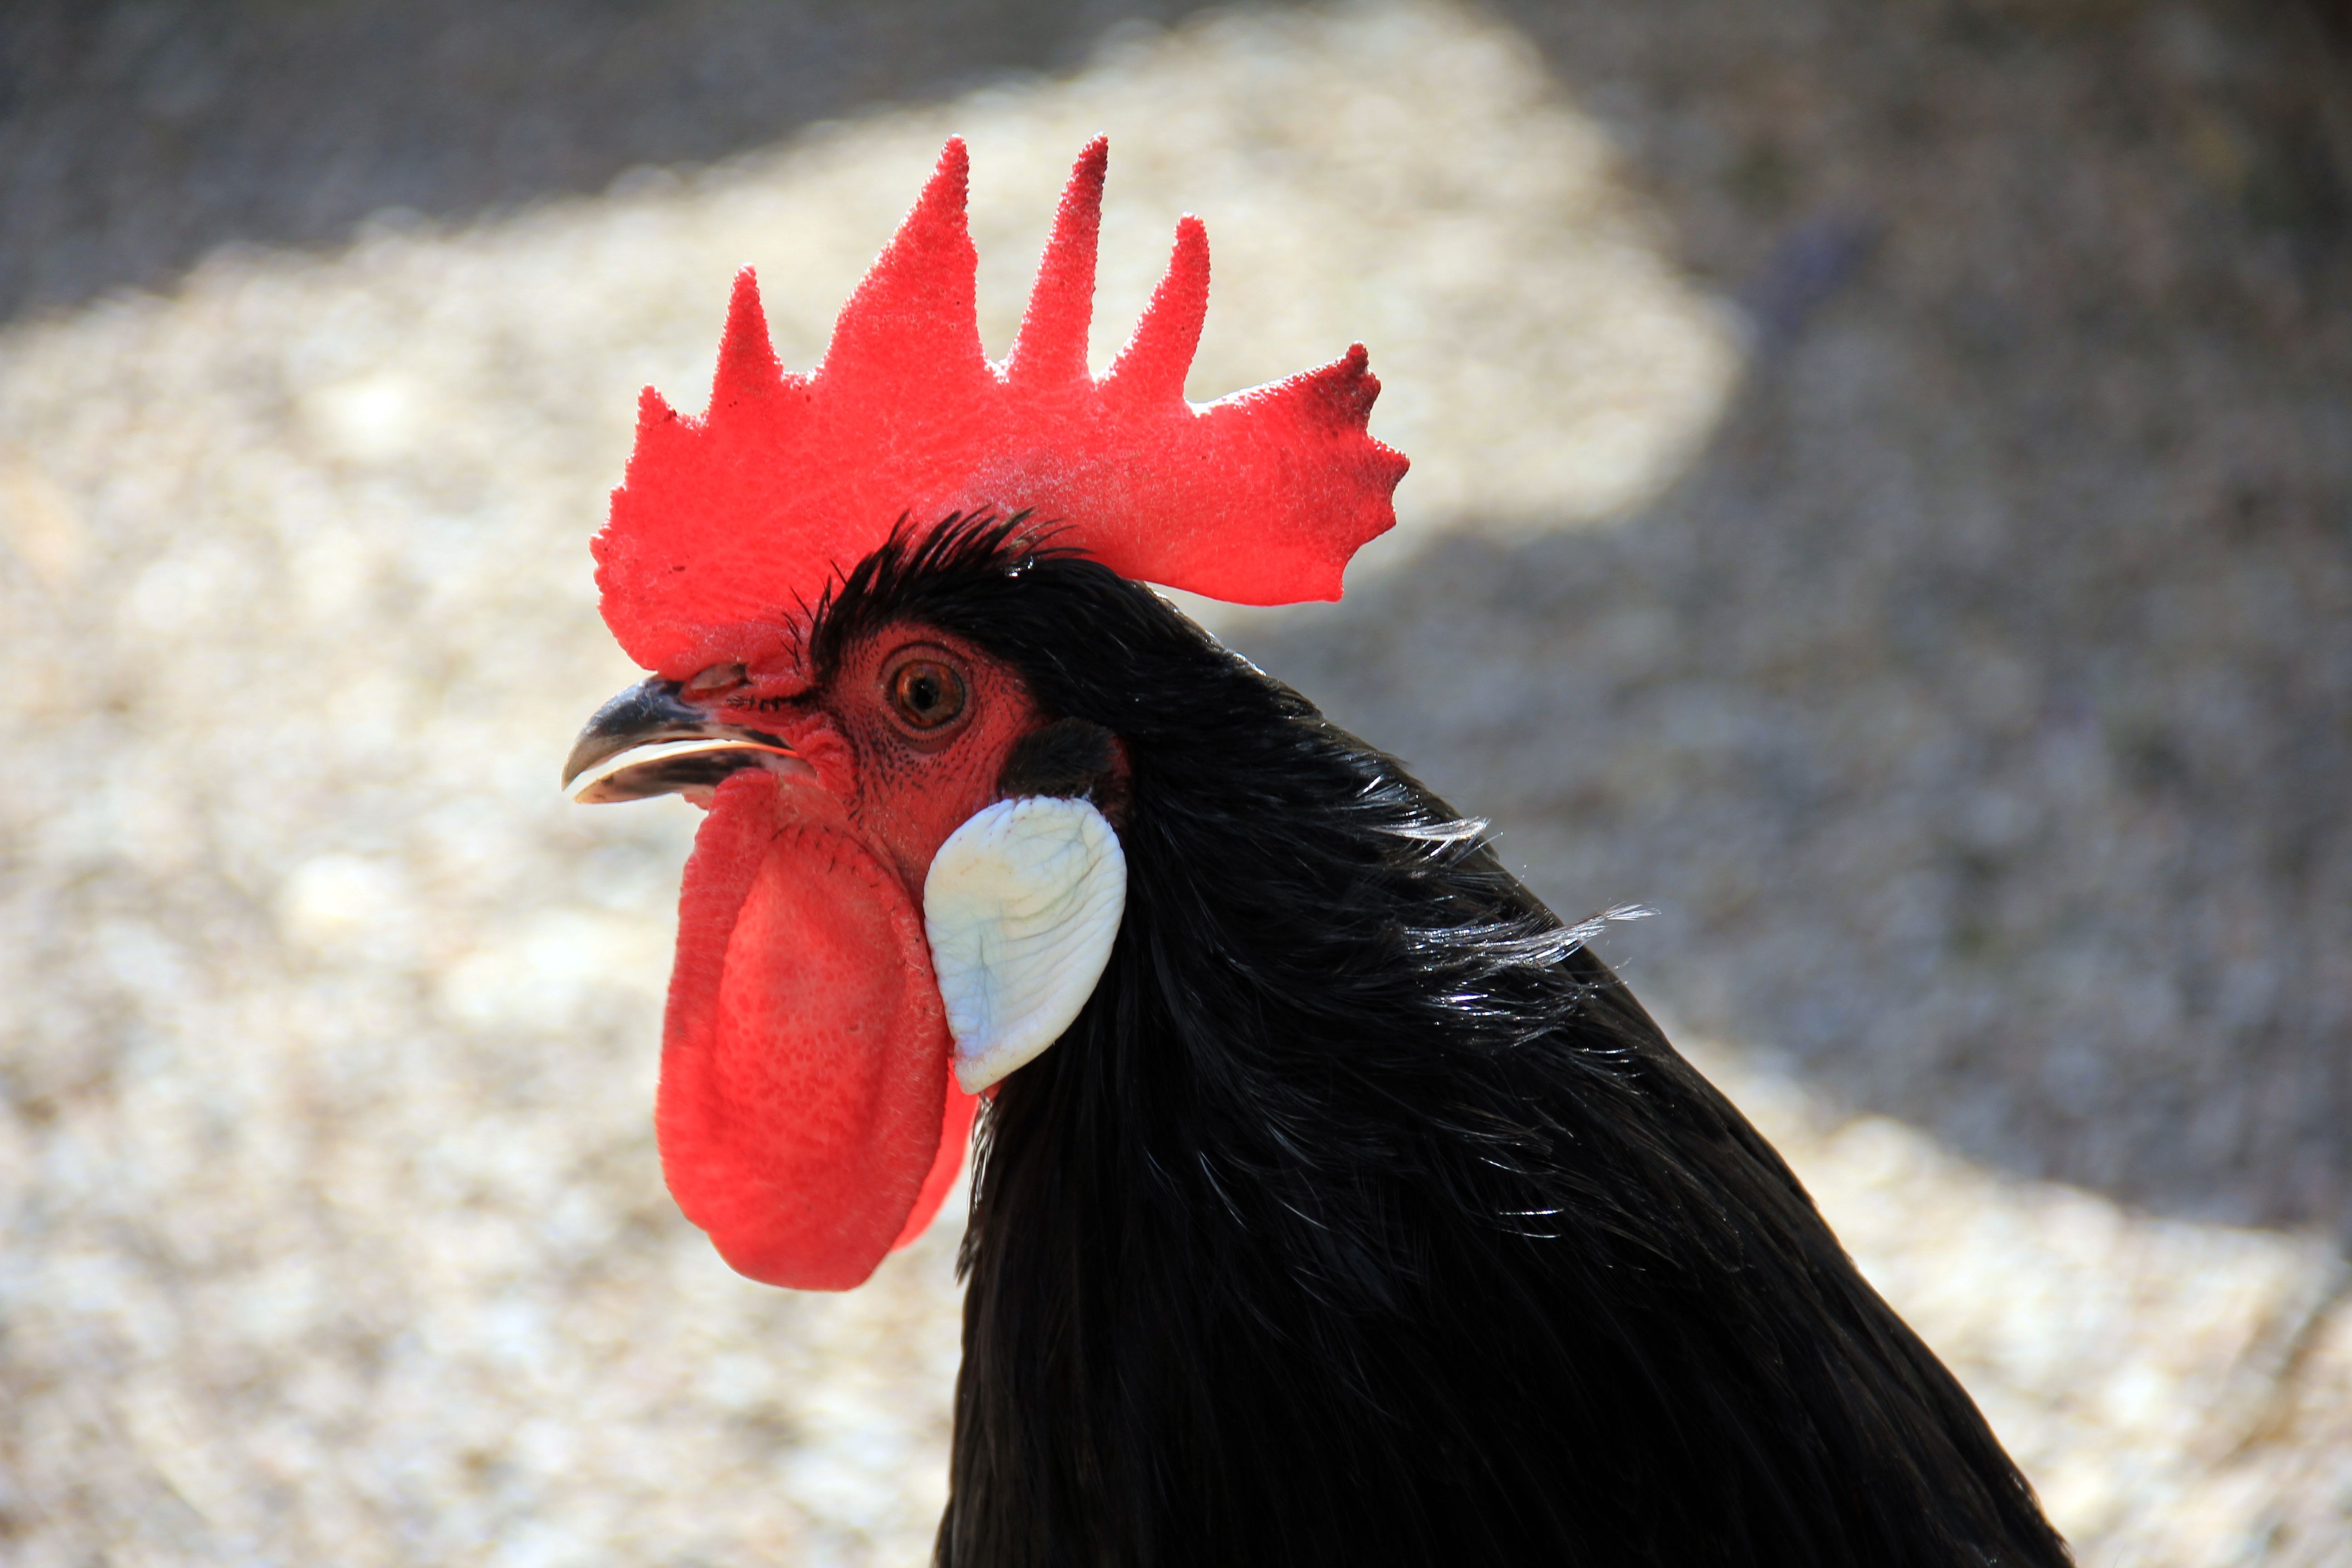 Free photo A black rooster with a red crest.